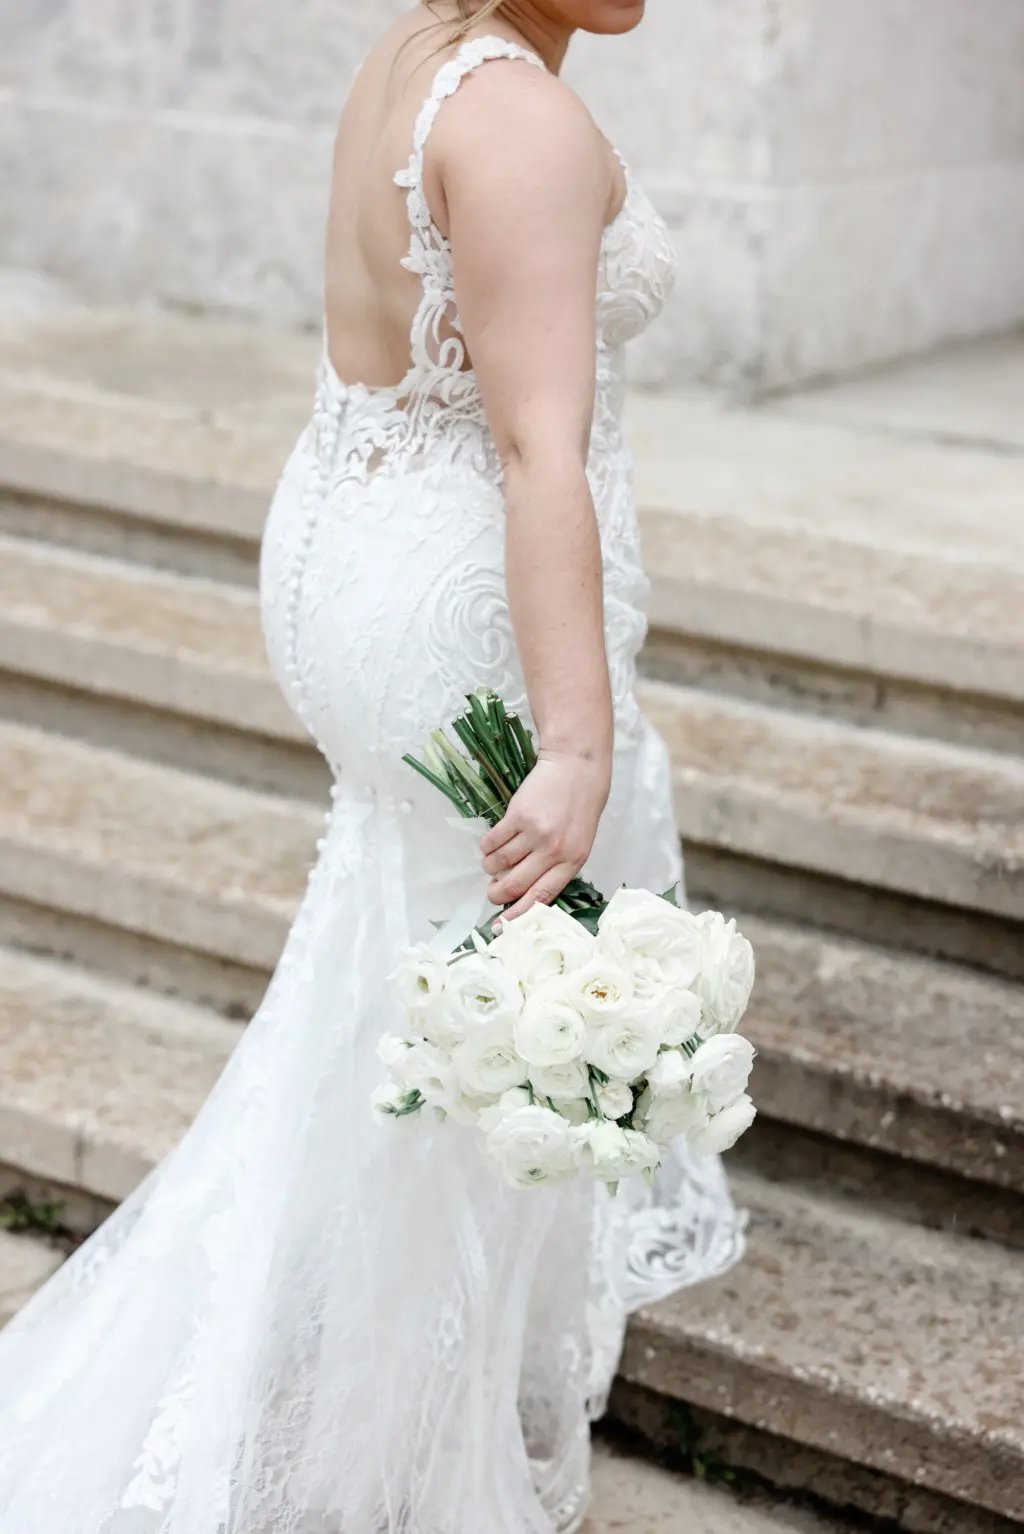 Bride Walking Up the Steps Wedding Portrait | White Garden Rose Bridal Bouquet | Clearwater Photographer Lifelong Photography